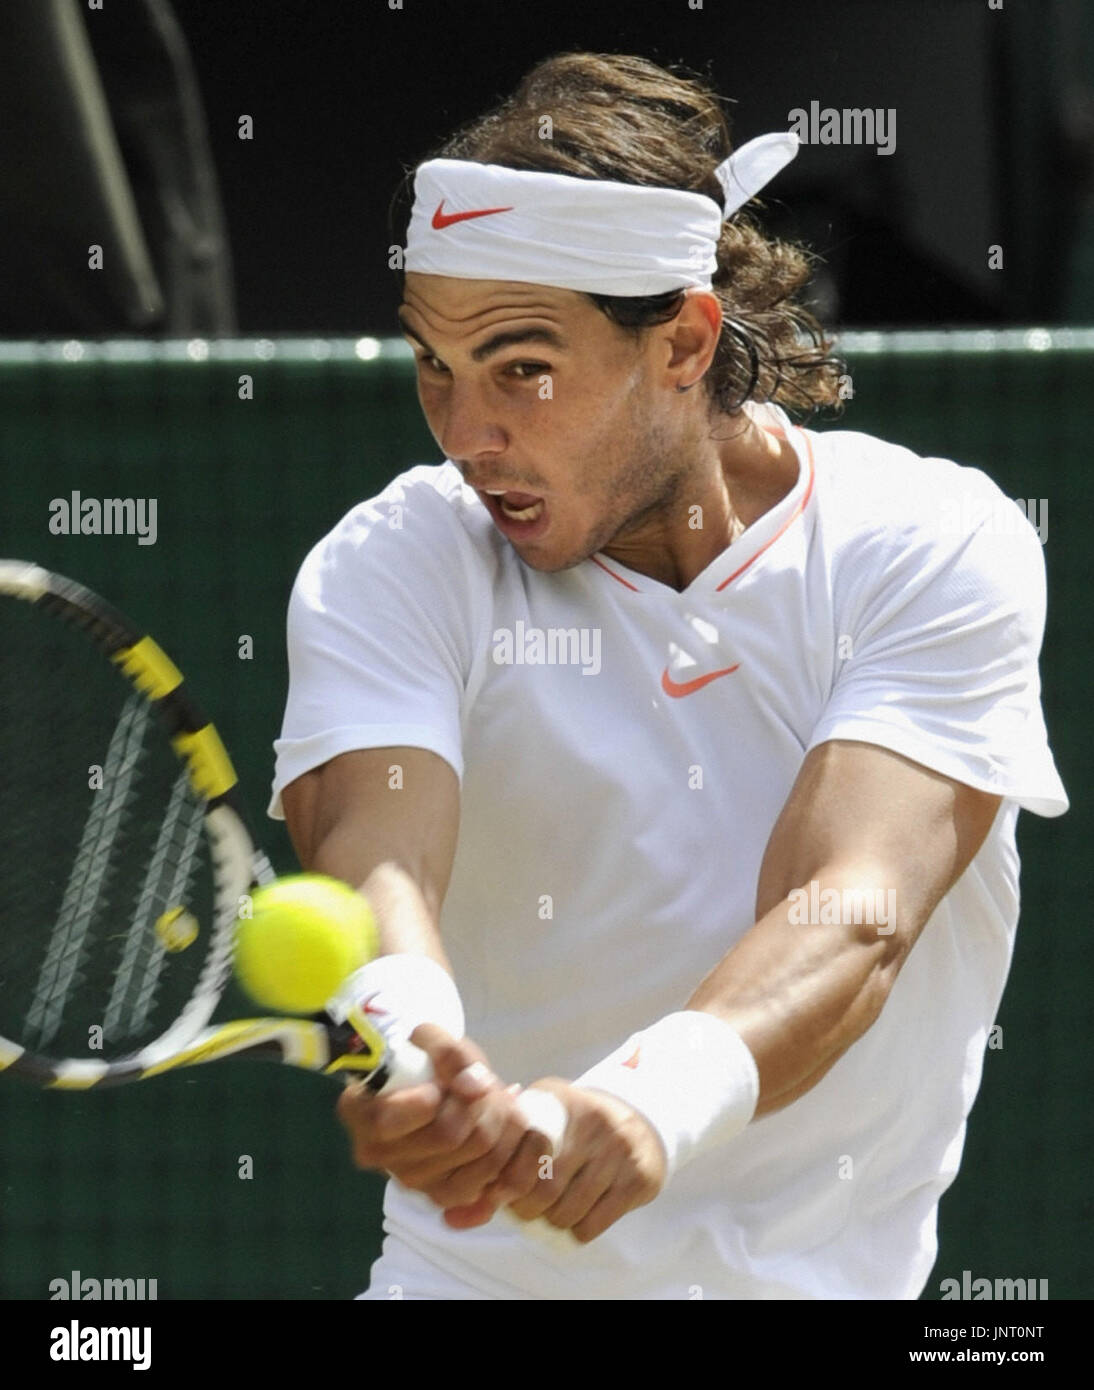 WIMBELDON, England - Rafael Nadal of Spain returns the ball to Tomas Berdych of the Czech Republic during the men's singles final at the Wimbledon tennis championships at the All England Tennis Club in London on July 4, 2010. Nadal won 6-3, 7-5, 6-4. (Kyodo) Stock Photo